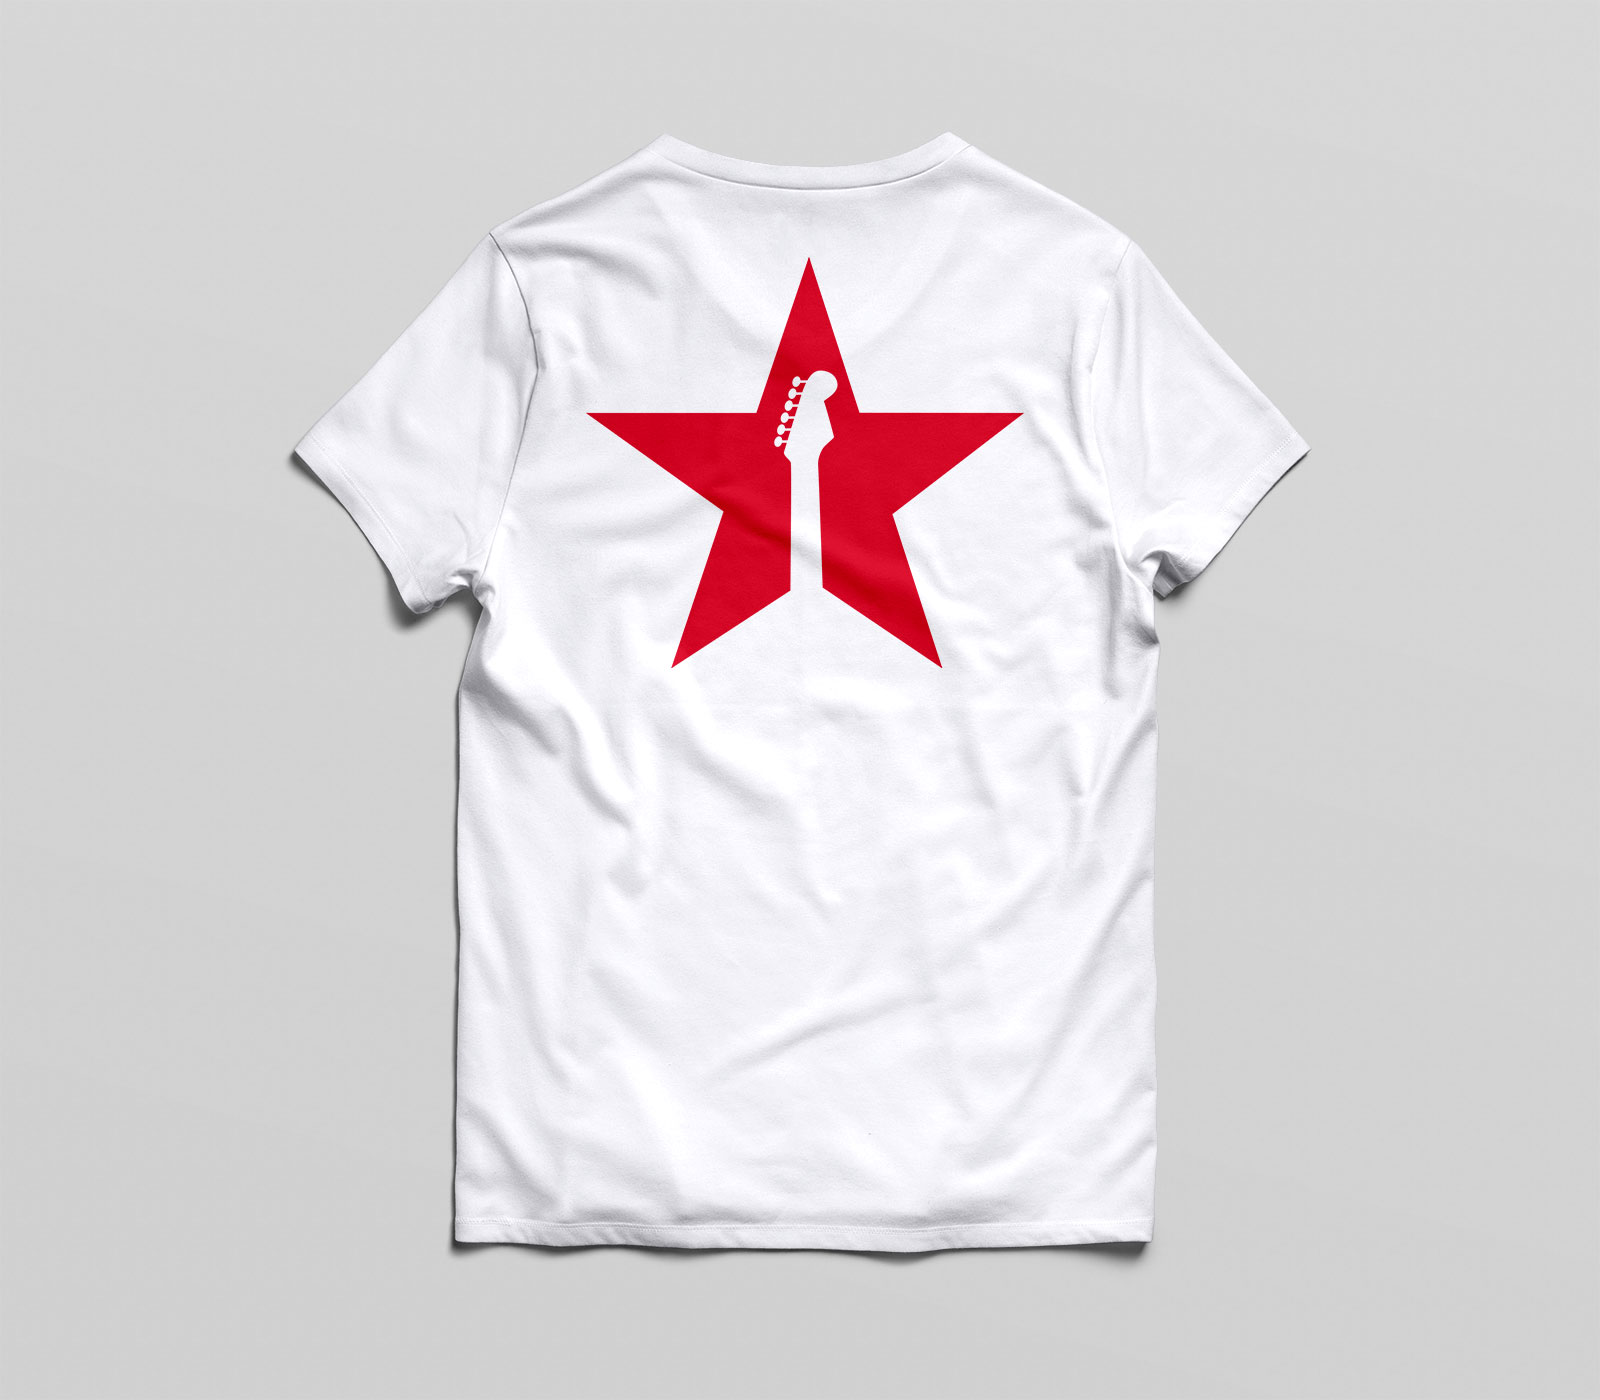 red star tee white back